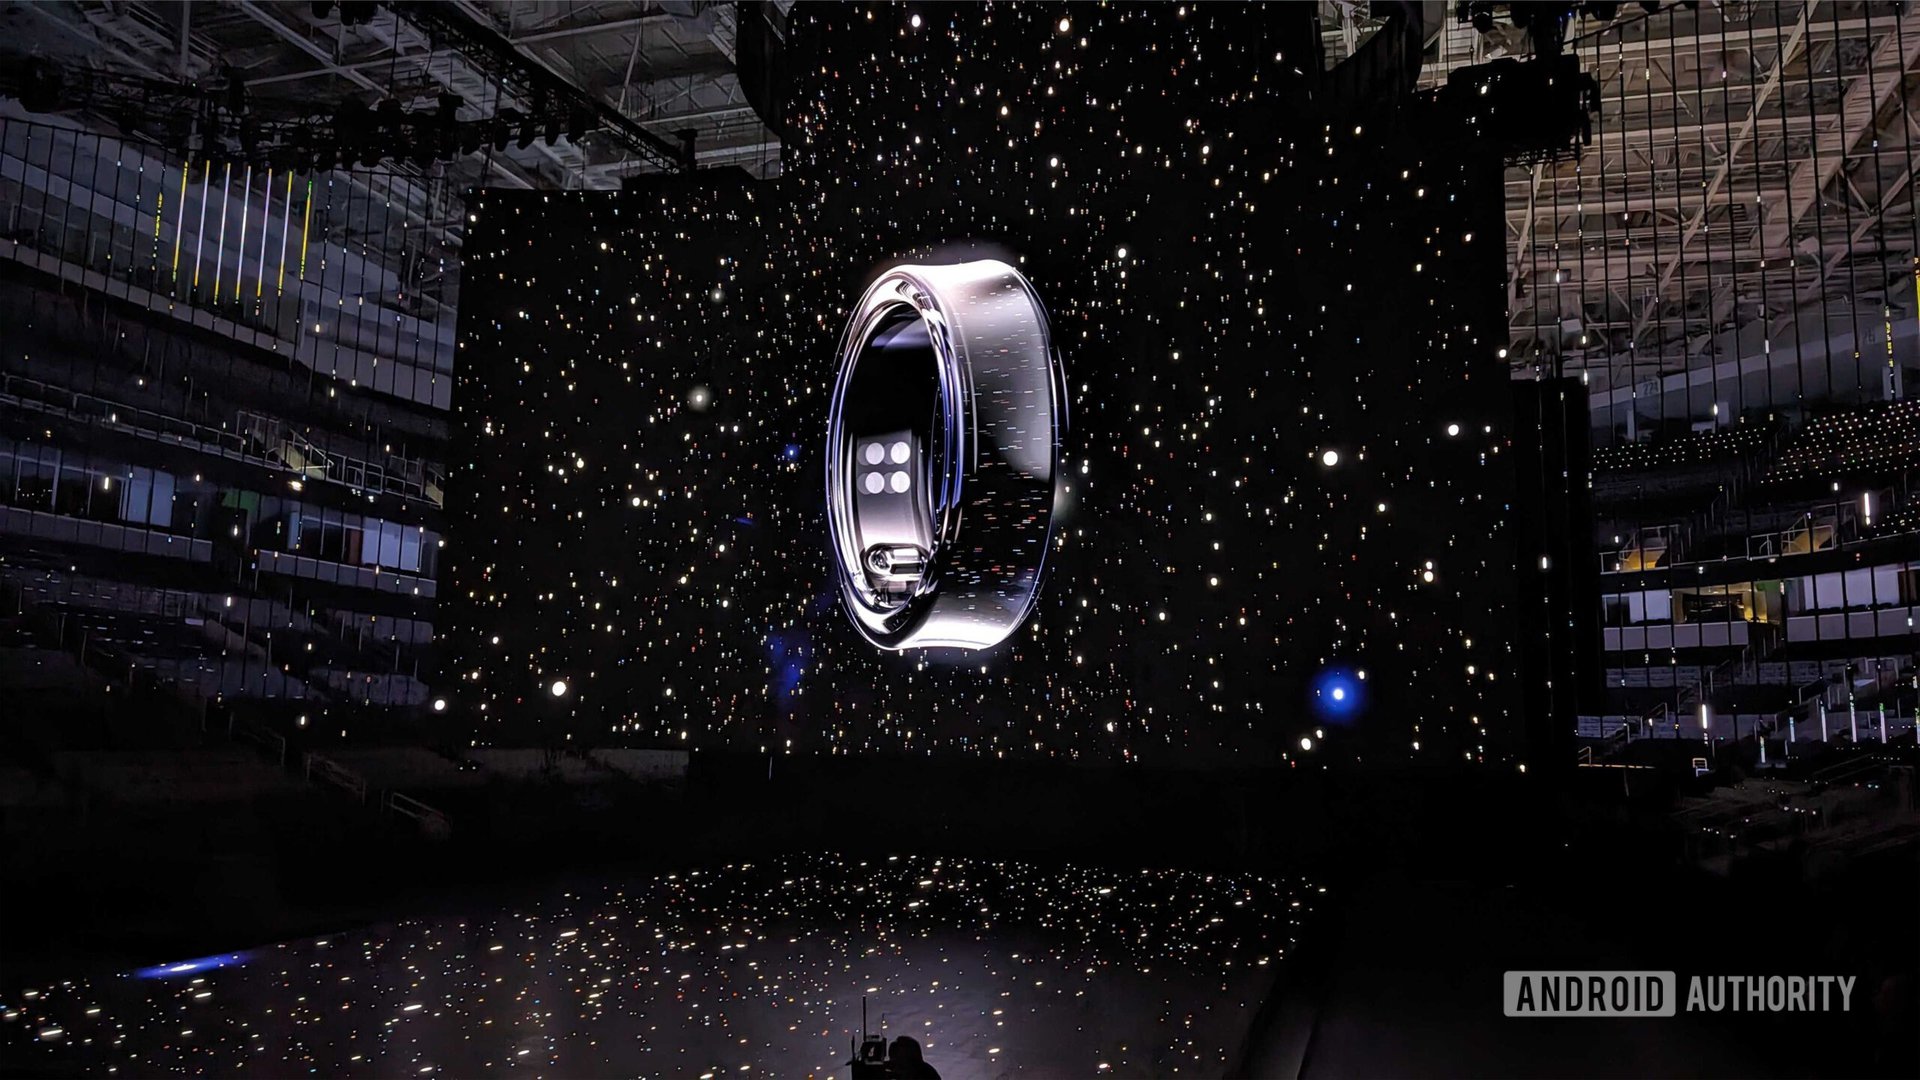 The Samsung Galaxy Ring is highlighted at hte sompany's January Unpacked event.